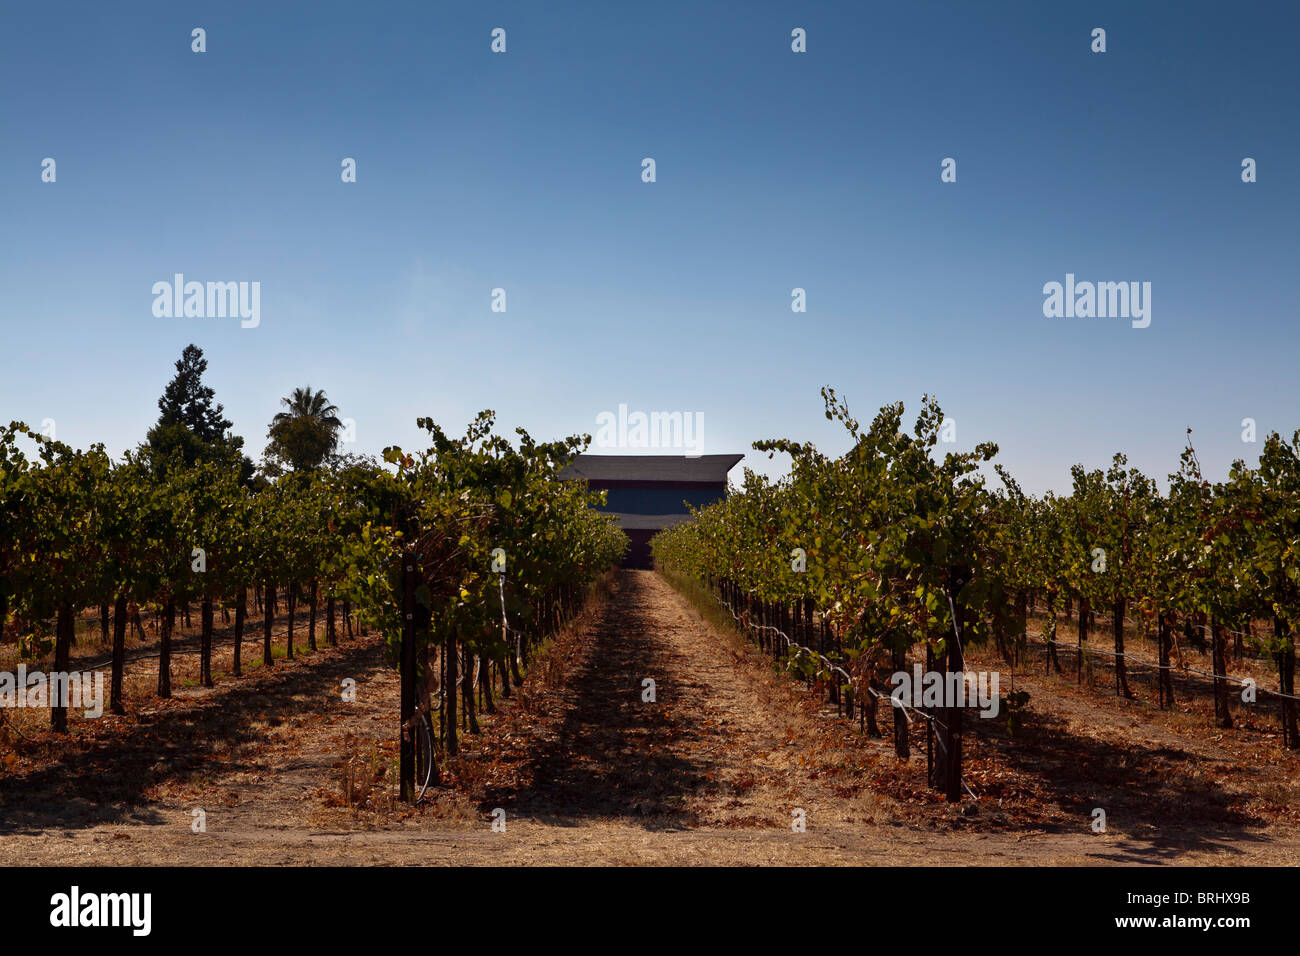 A barn amidst a vineyard in the Lodi California wine country Stock Photo